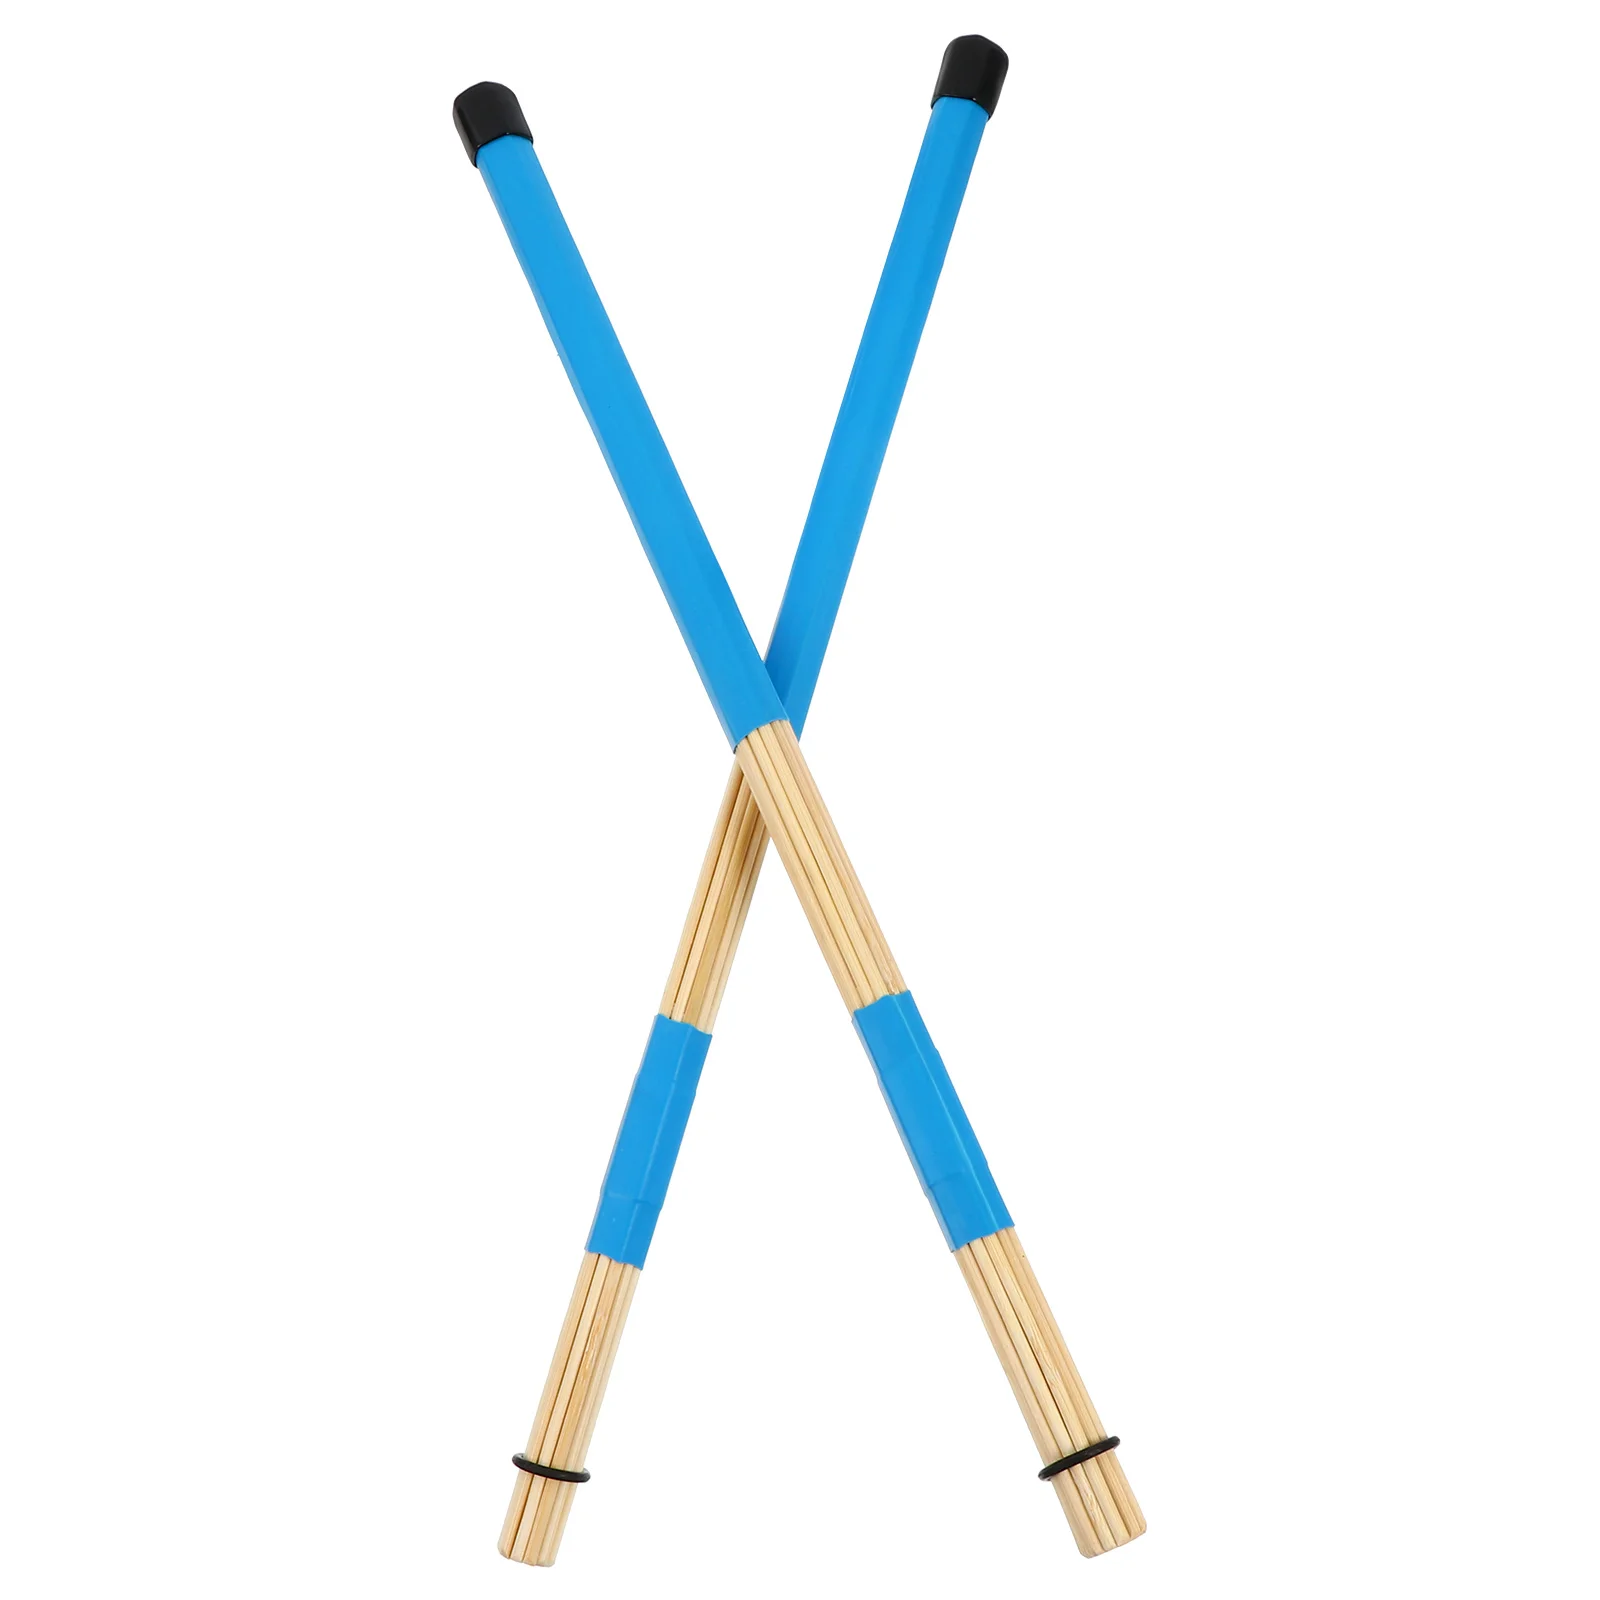 

Drum Sticks Percussion Drumstick Mallets Wood Stick Drumsticks Instrumentxylophone Wooden Brushes Snare Display Marching Jass